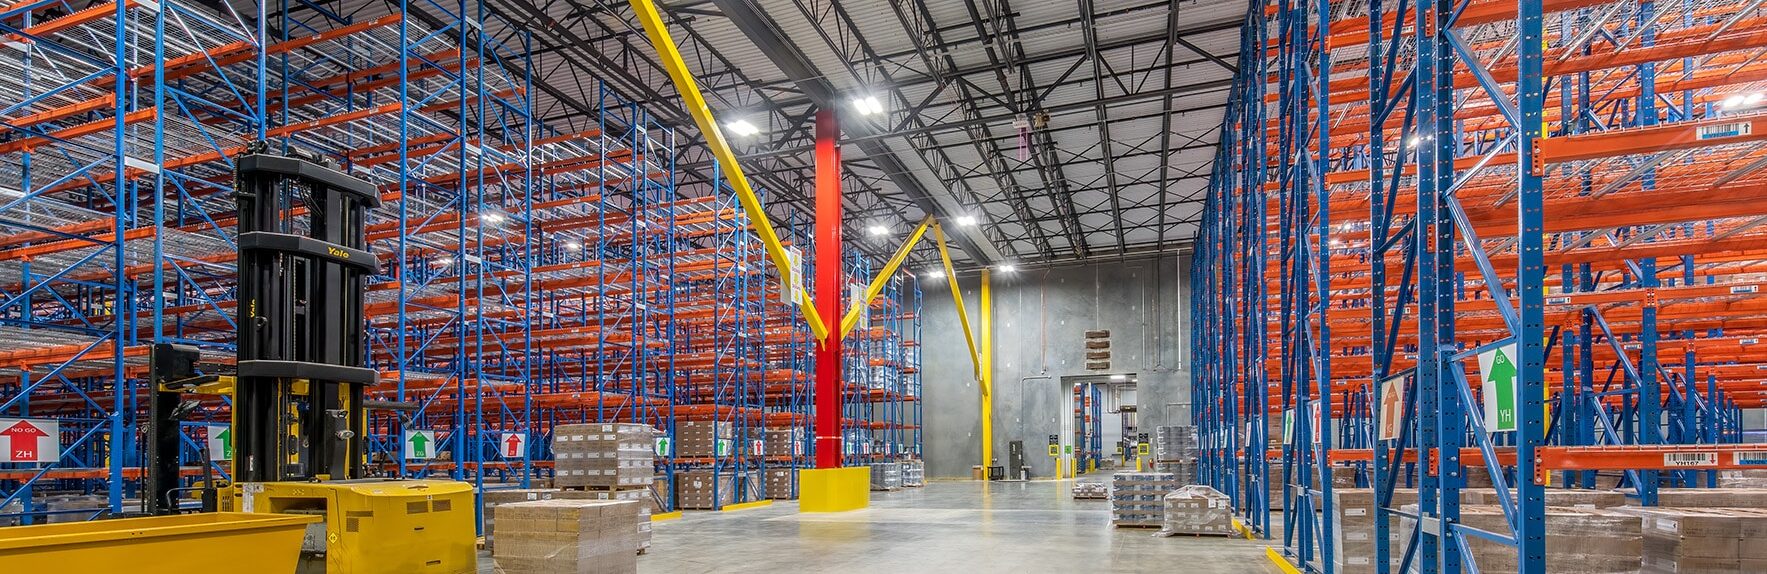 interior image of PPG paints warehouse expansion